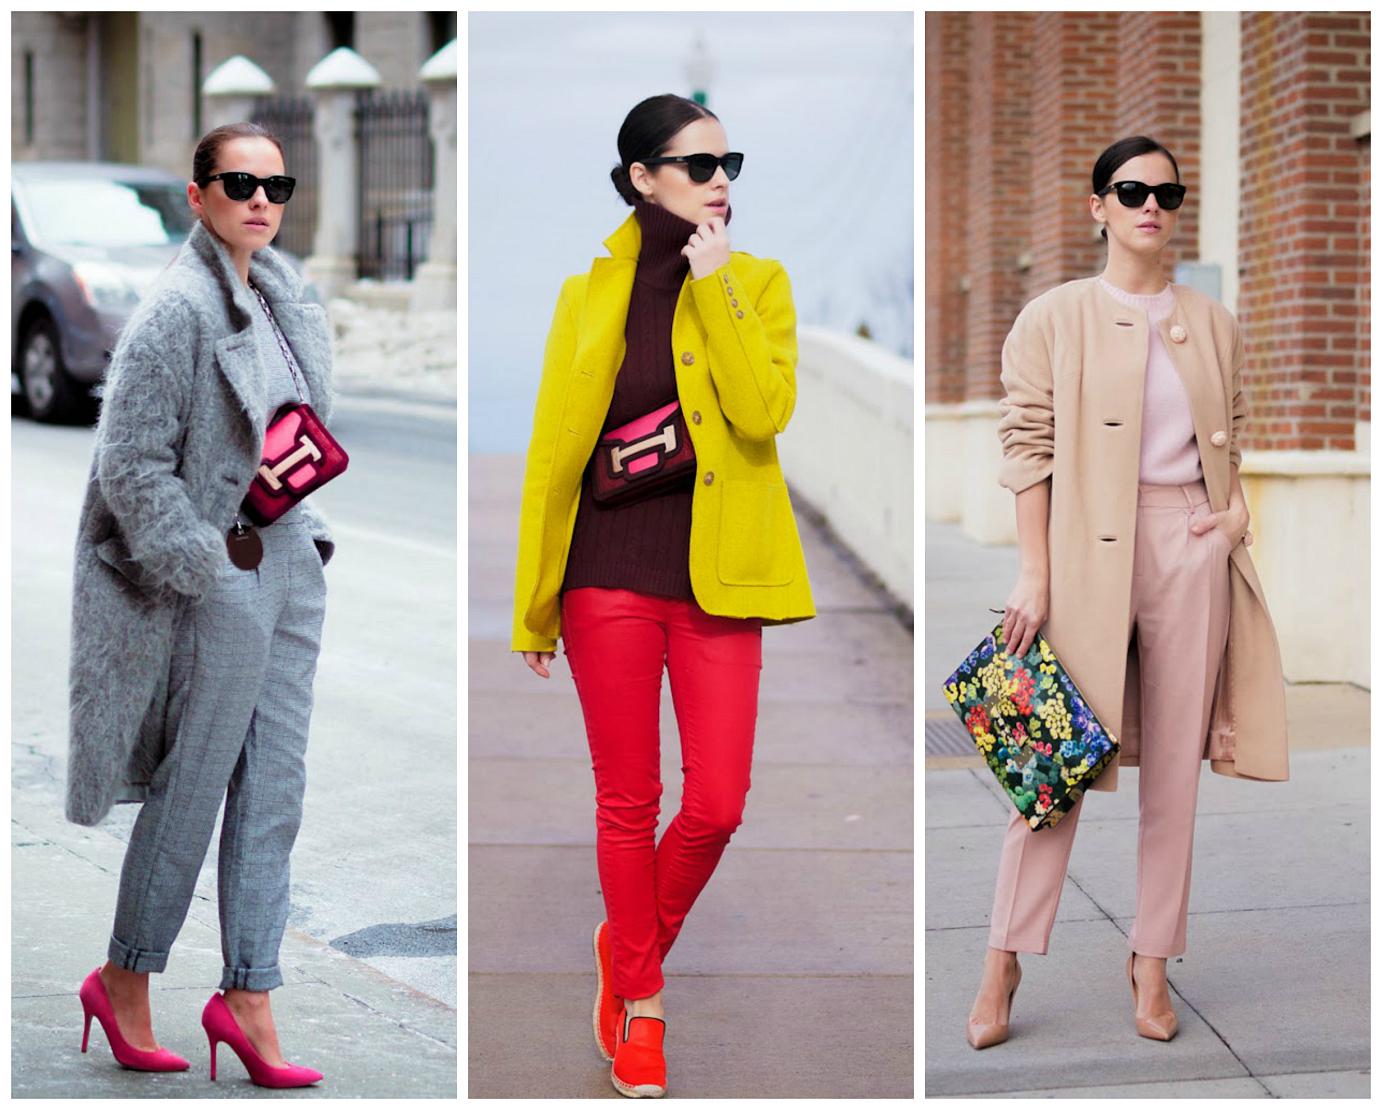 bittersweet colours, 2014 outfits, colorful coats, colorful shoes, street style, fall street style, summer style, 